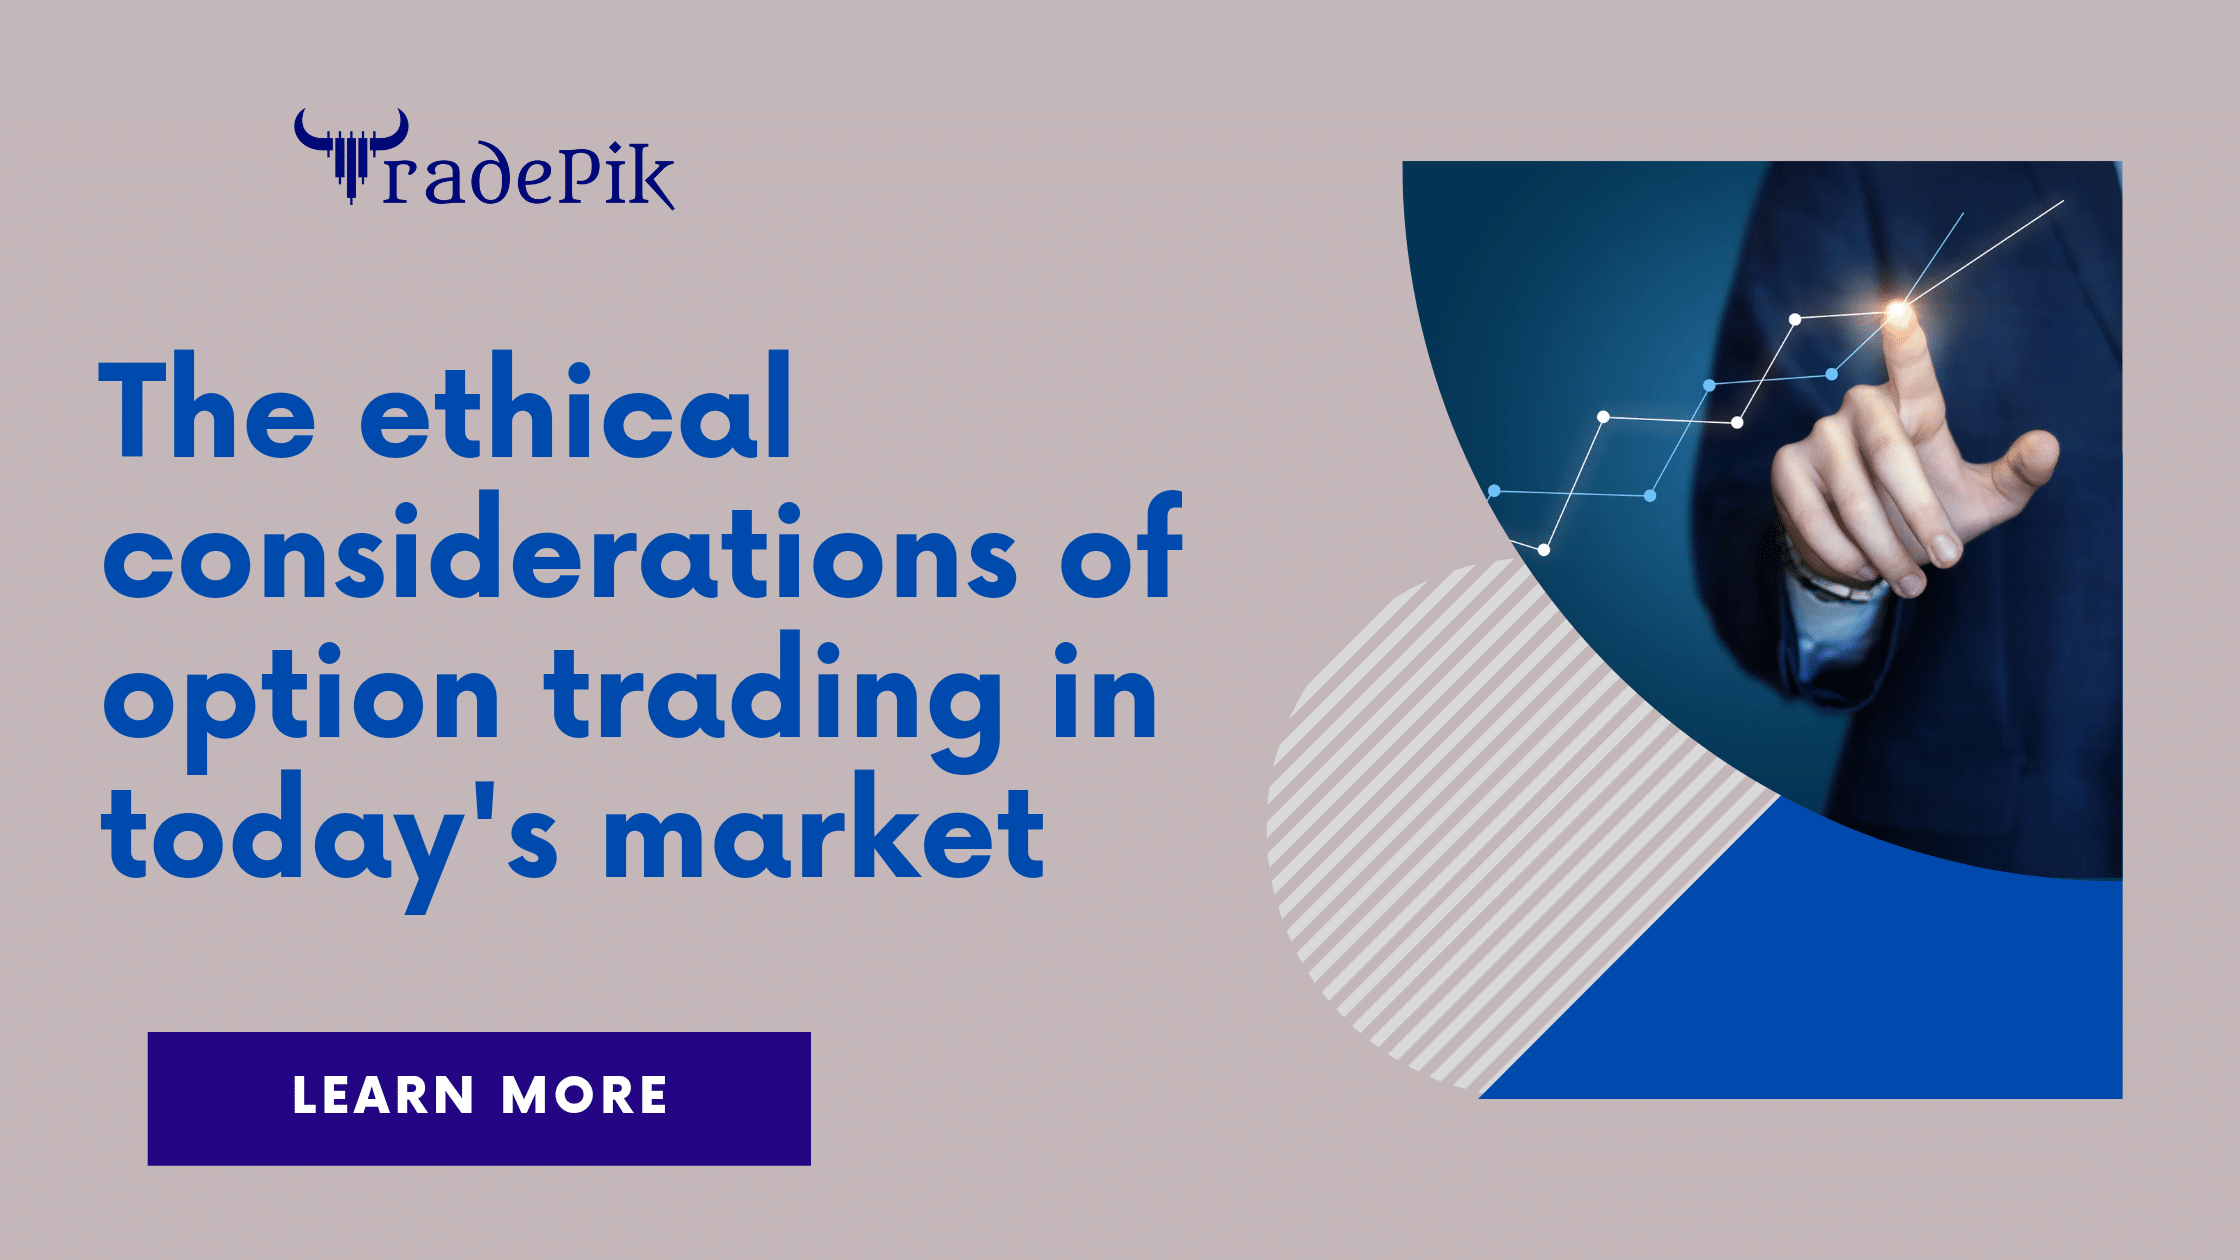 The ethical considerations of option trading in today's market.